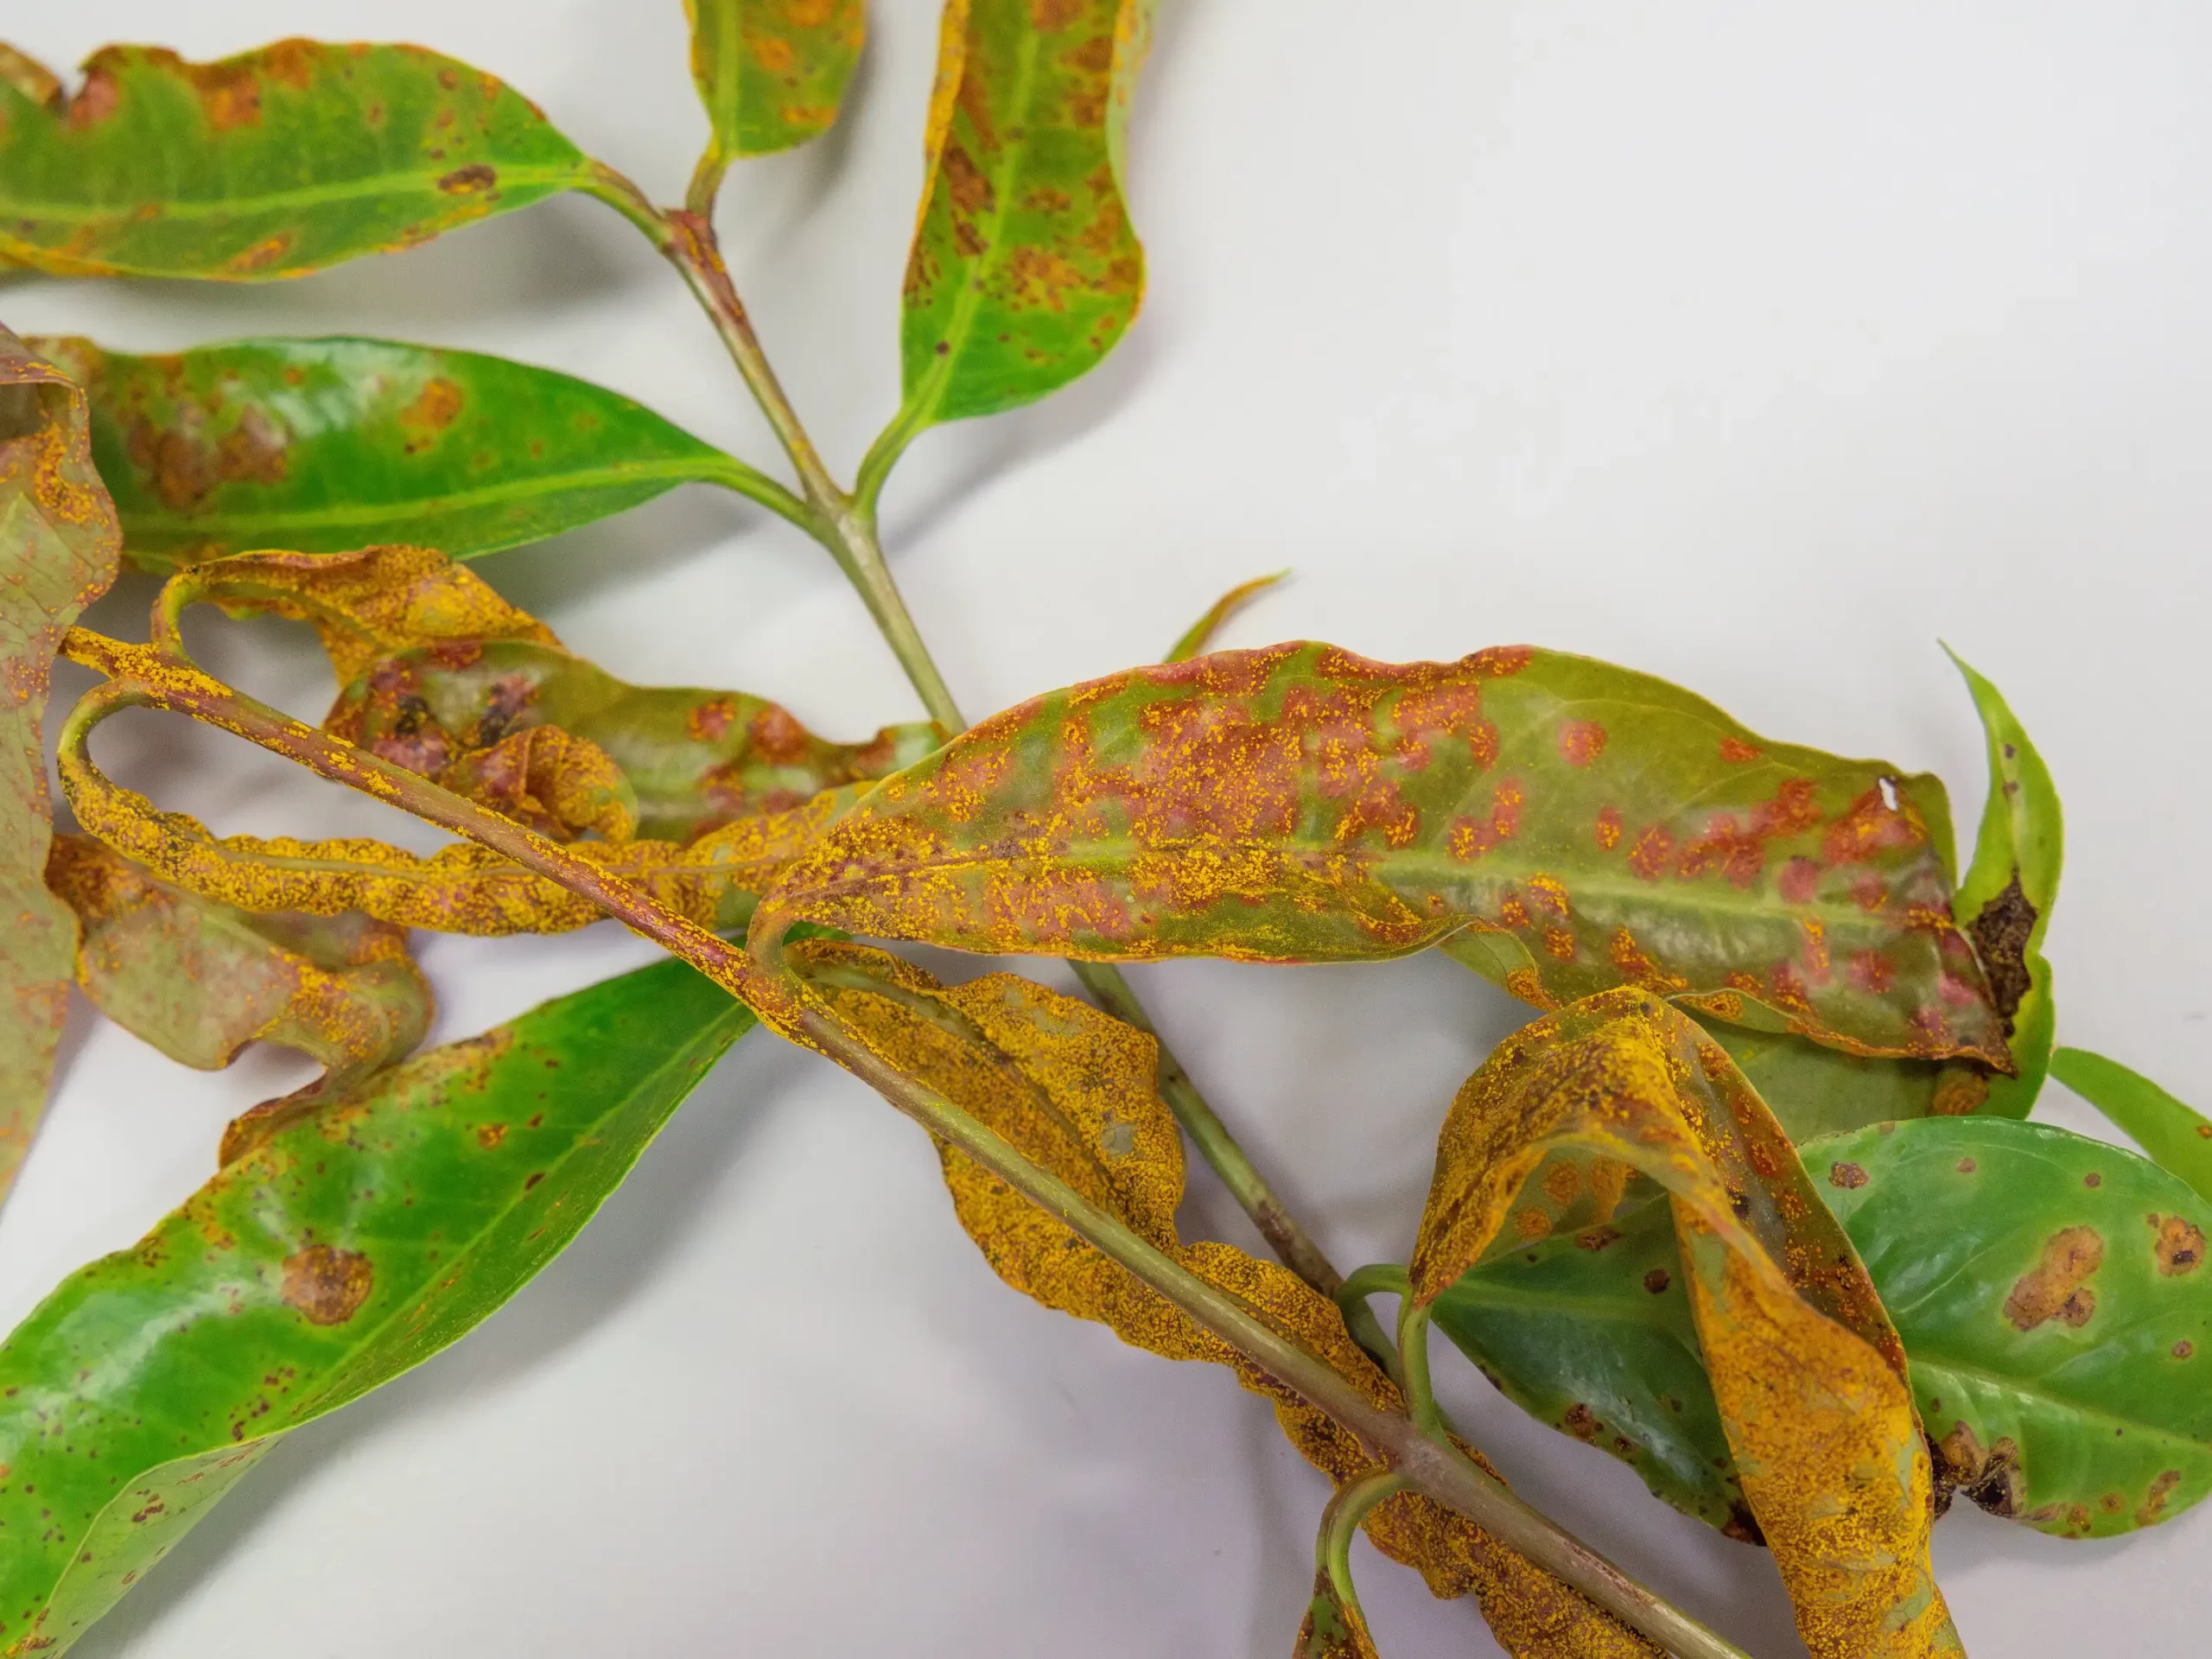 Leaves infected with myrtle rust. Credit: Megan Pope/University of Queensland